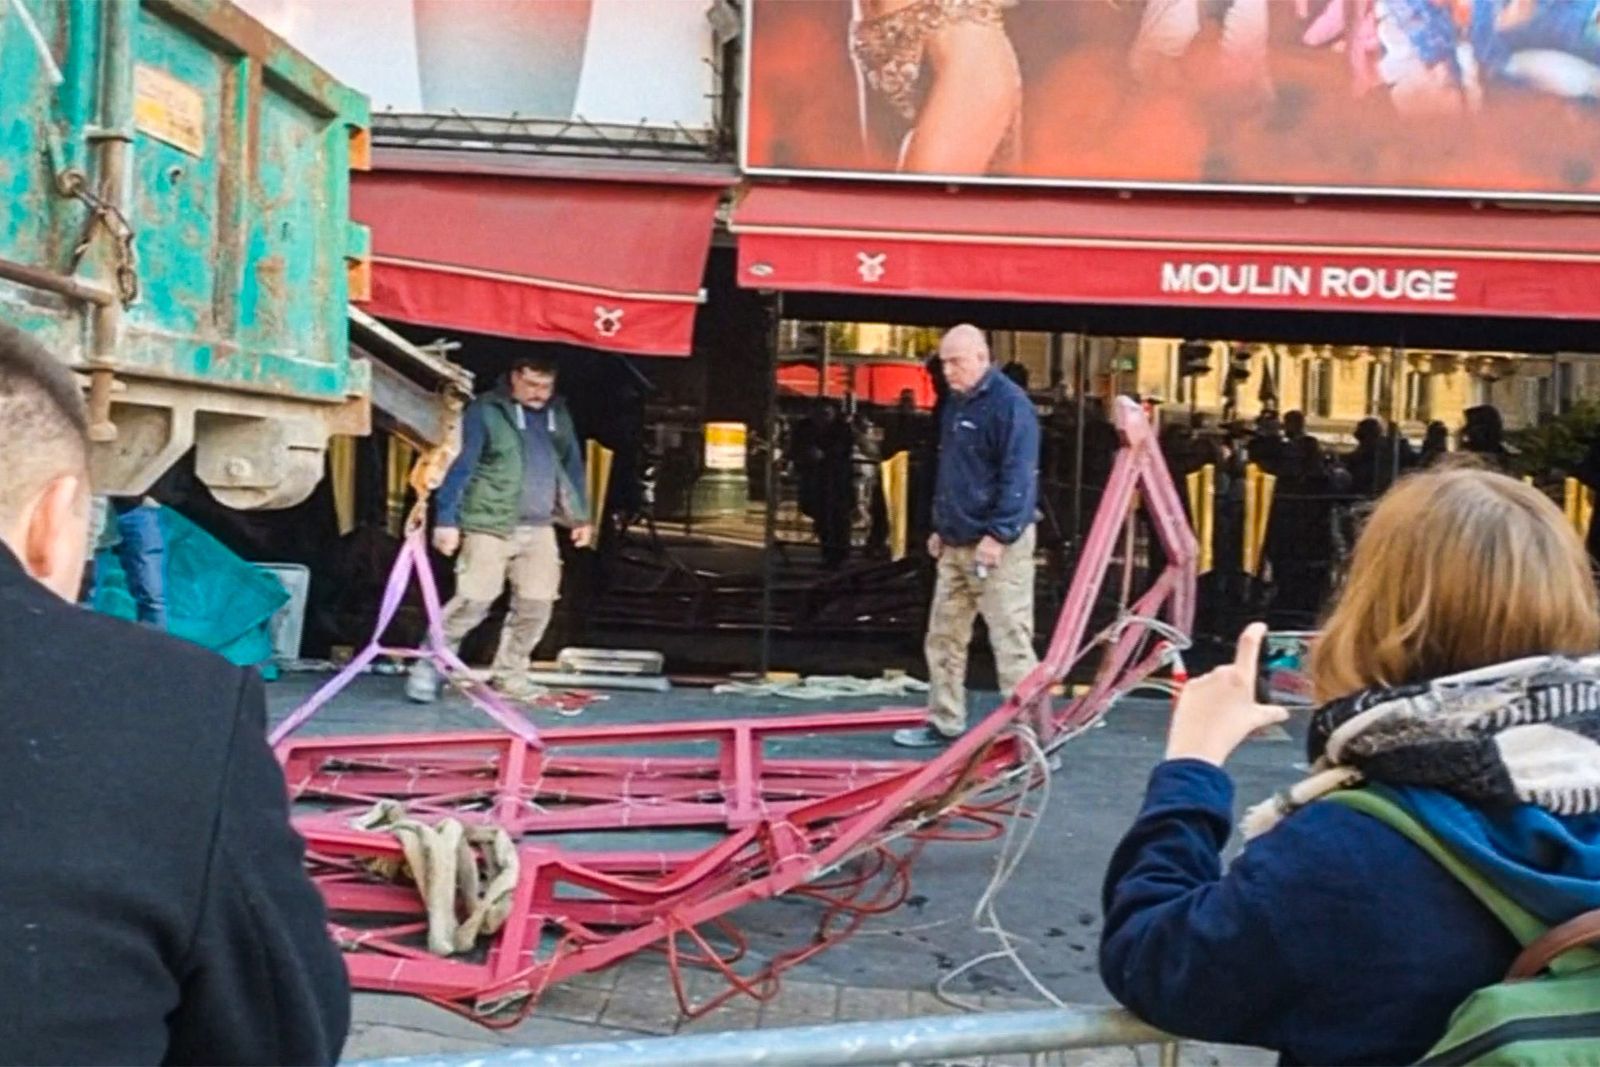 A framegrab taken from an AFP video shot in Paris on April 25, 2024, shows one of the blades of the Moulin Rouge musical cabaret on the pavement after it collapsed overnight, prior to be removed by workers. The blades of the windmill on top of the Moulin Rouge cabaret, one of the most famous landmarks in Paris, collapsed during the night of April 24, 2025, firefighters said, just months before the French capital hosts the Olympics. (Photo by Marine DO-VALE / AFP)